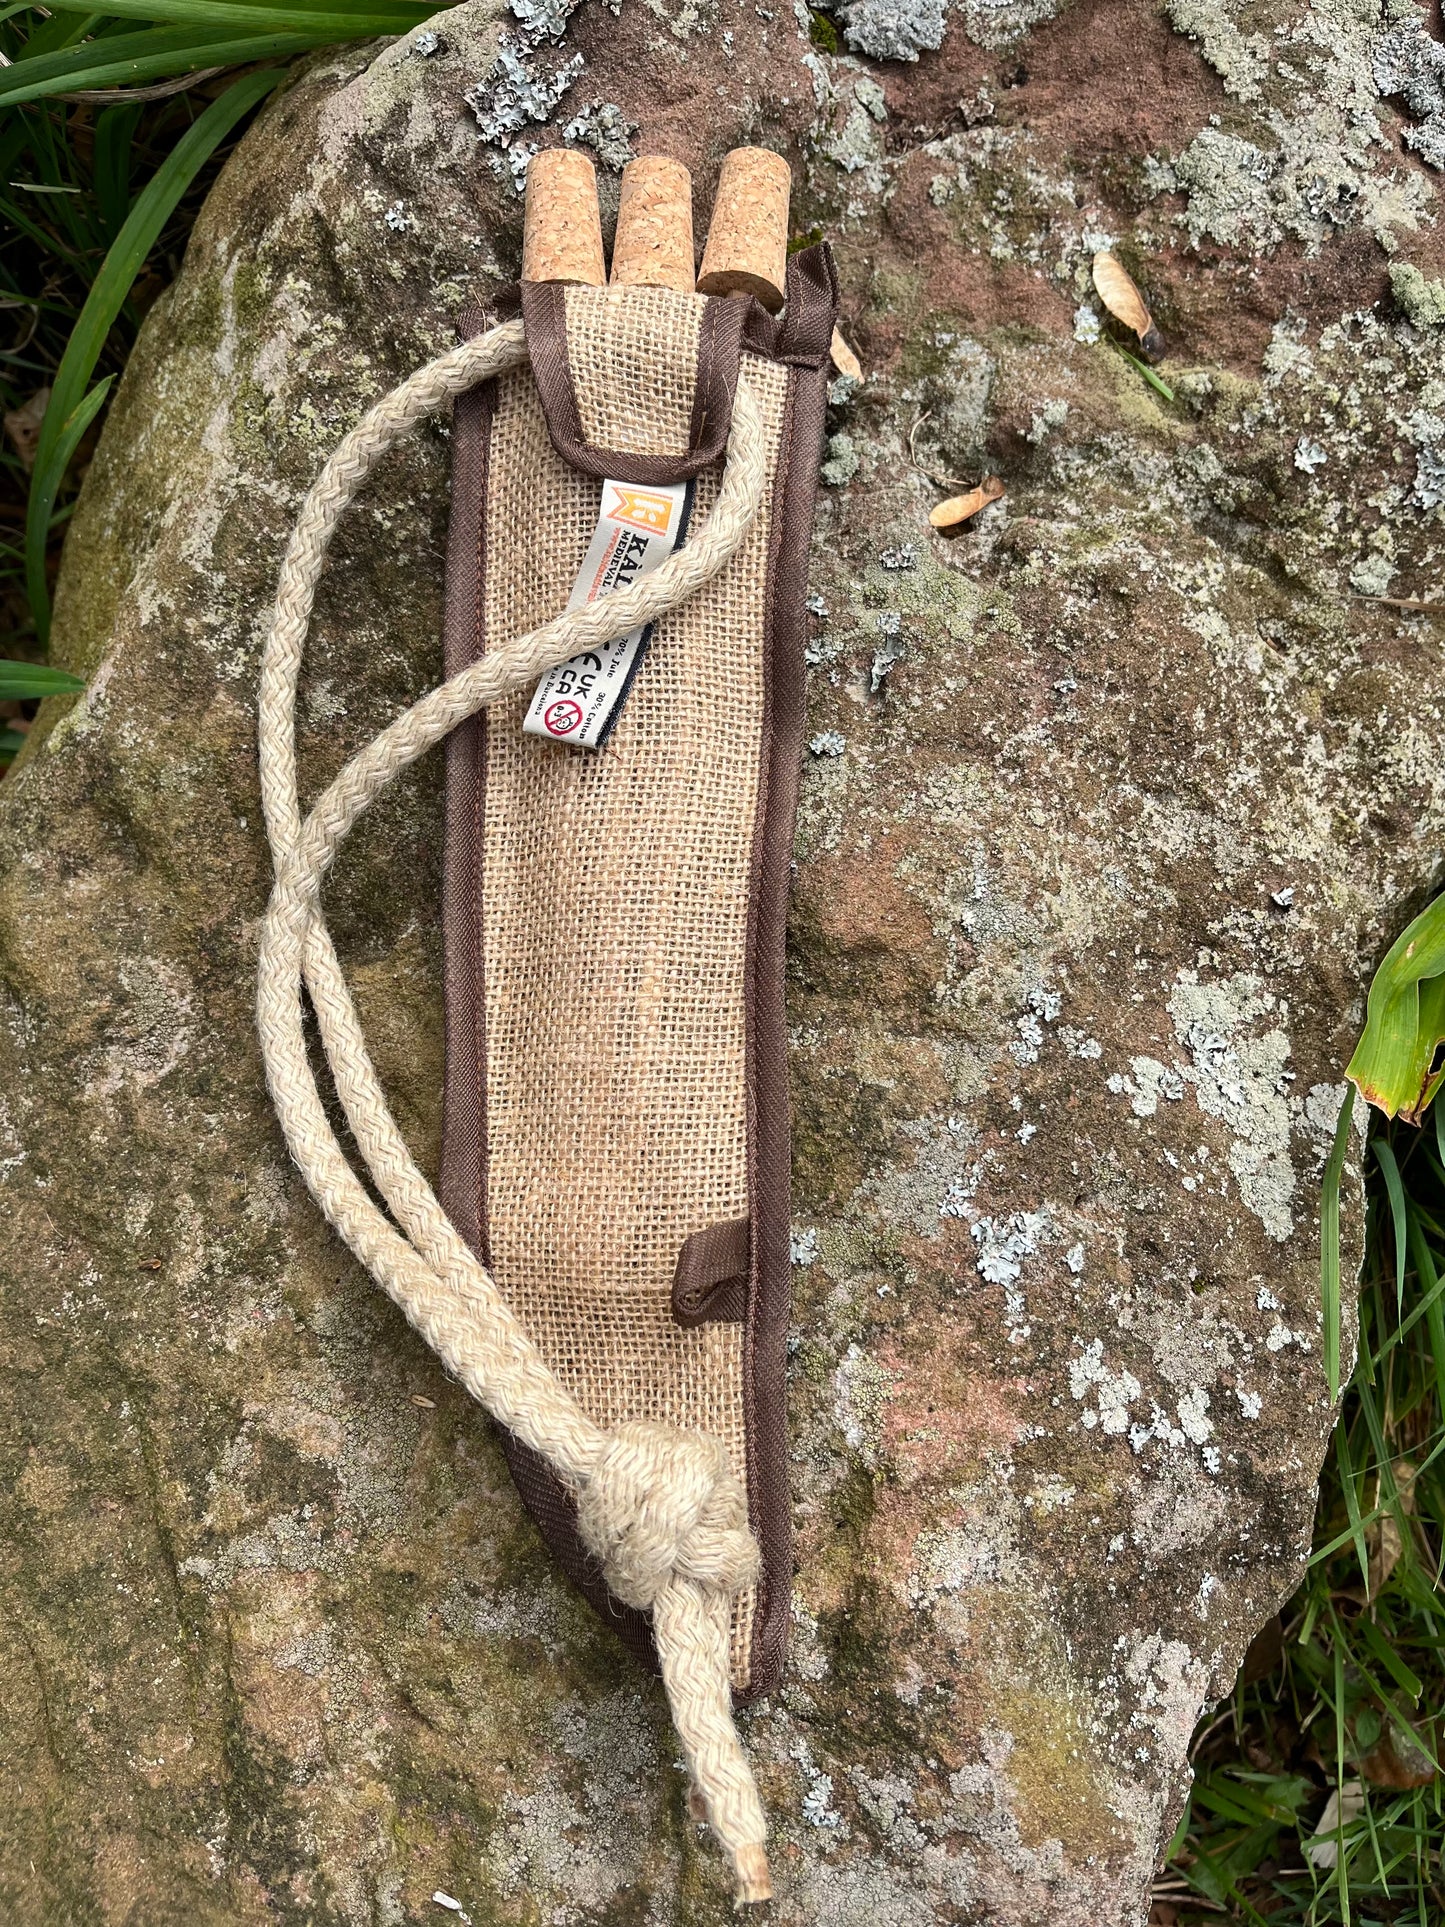 Royal Wooden Bow and Arrow JUTE QUIVER Holder